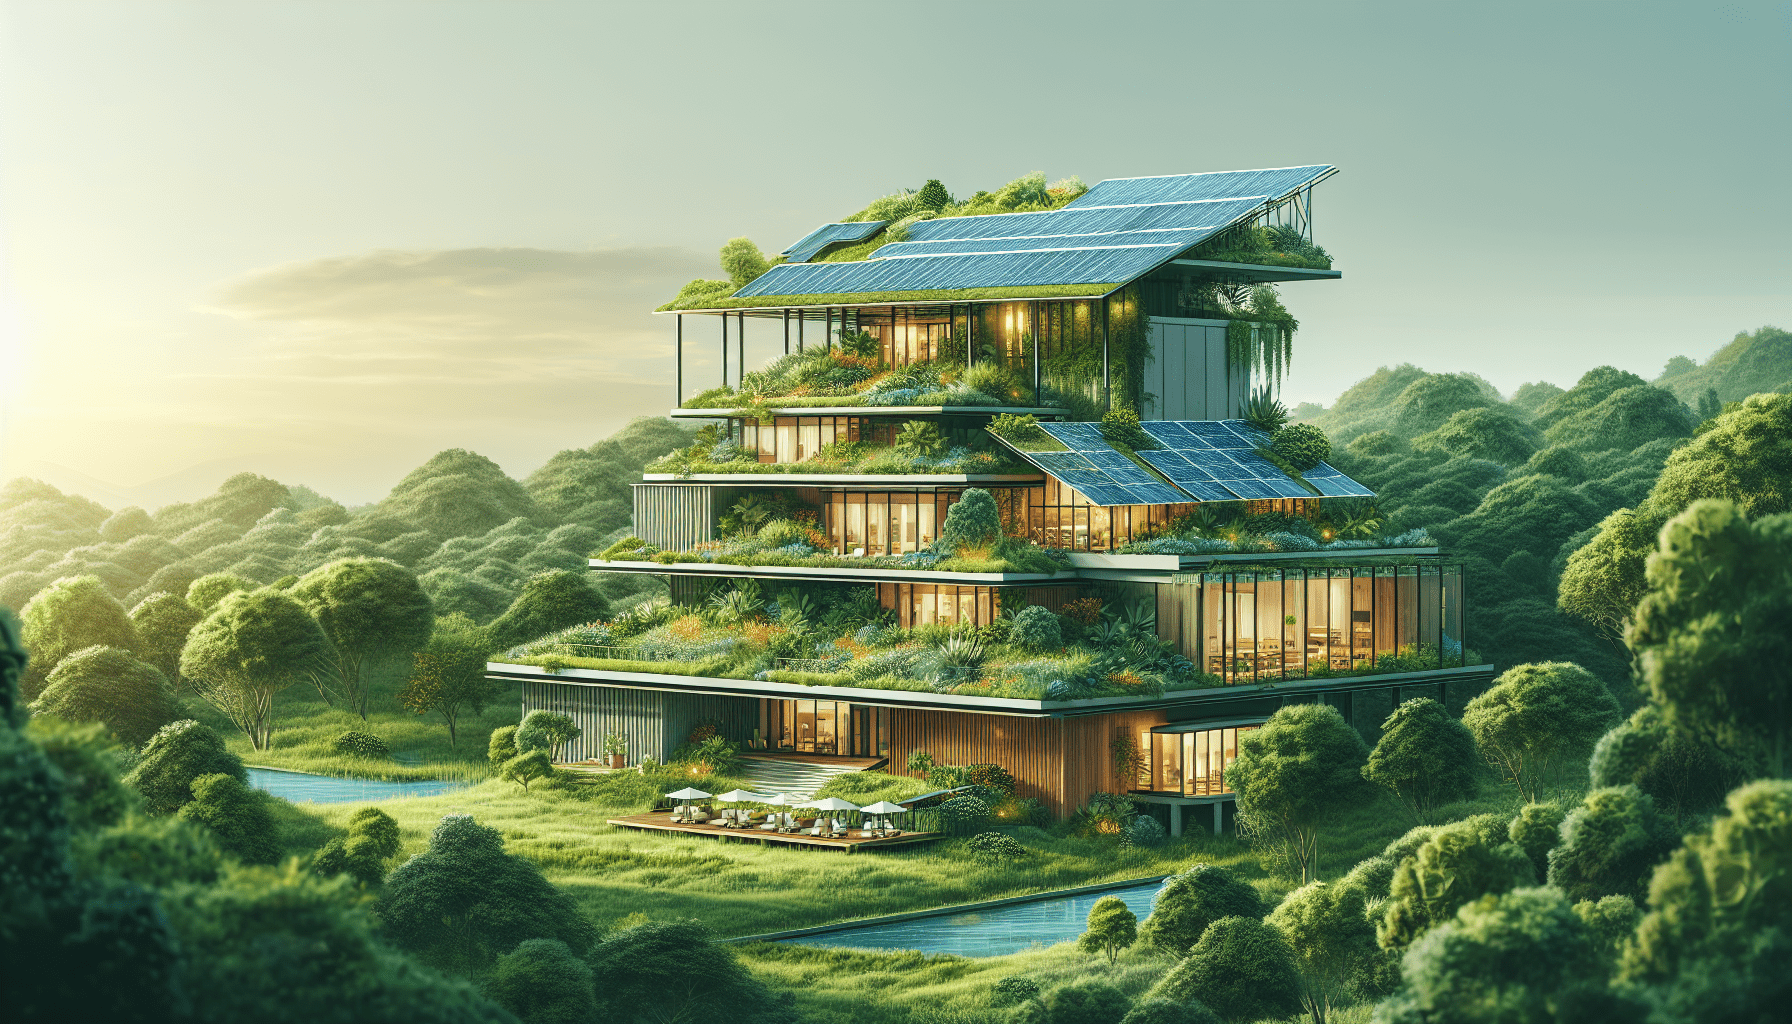 What Are The Principles Of Sustainable Architecture?